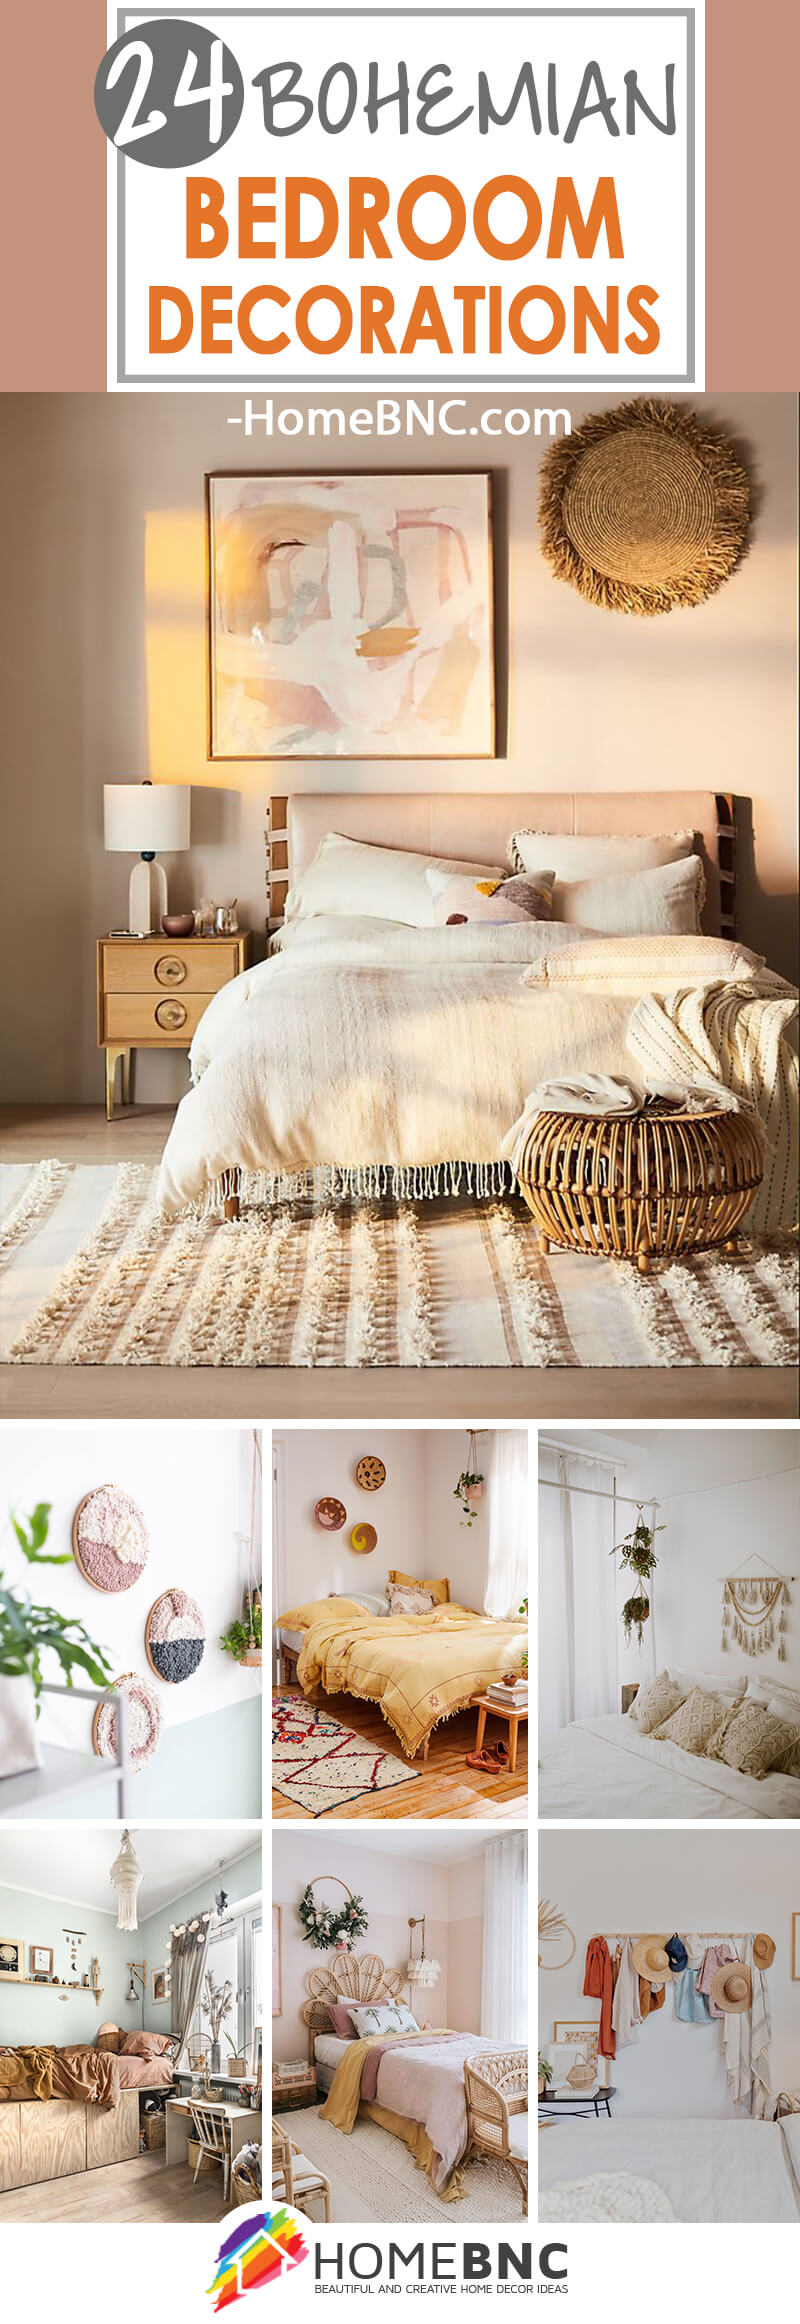 24 Best Bohemian Bedroom Decor Ideas To Spruce Up Your Space In 2021 - Boho Bedroom Decor Ideas